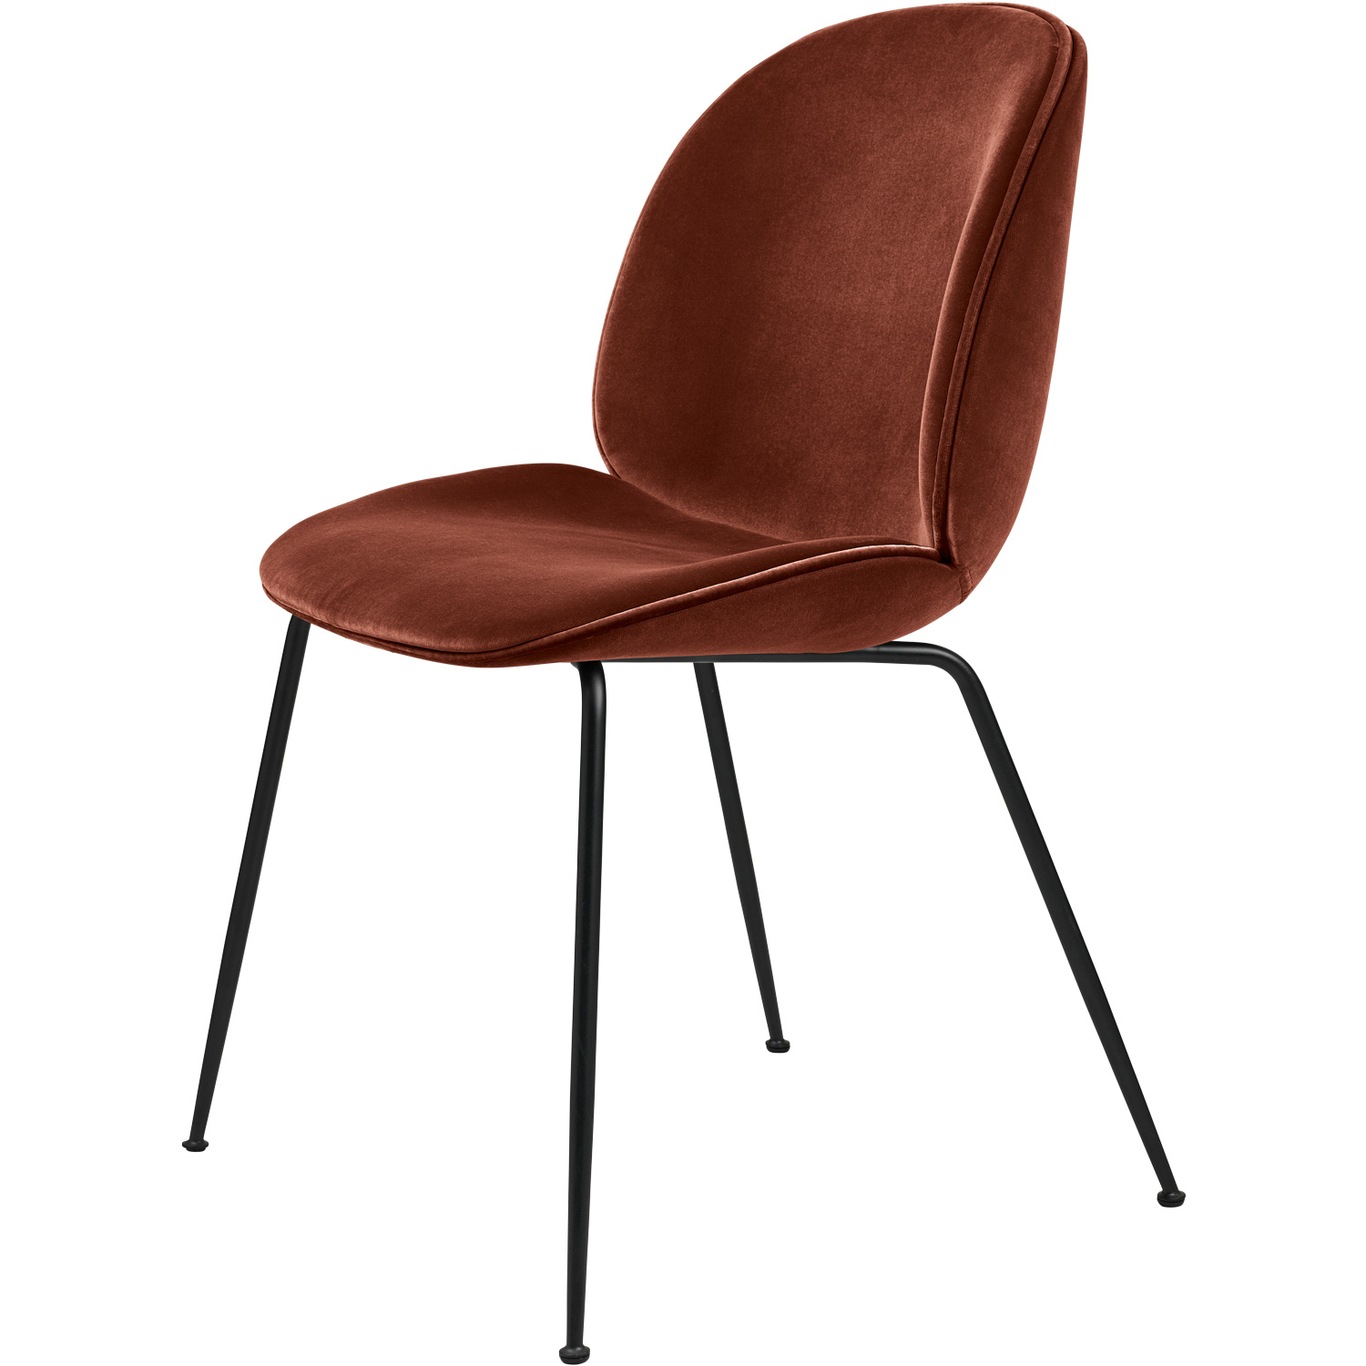 Beetle Chair Upholstered Black Base / Dandy, Rusty Red